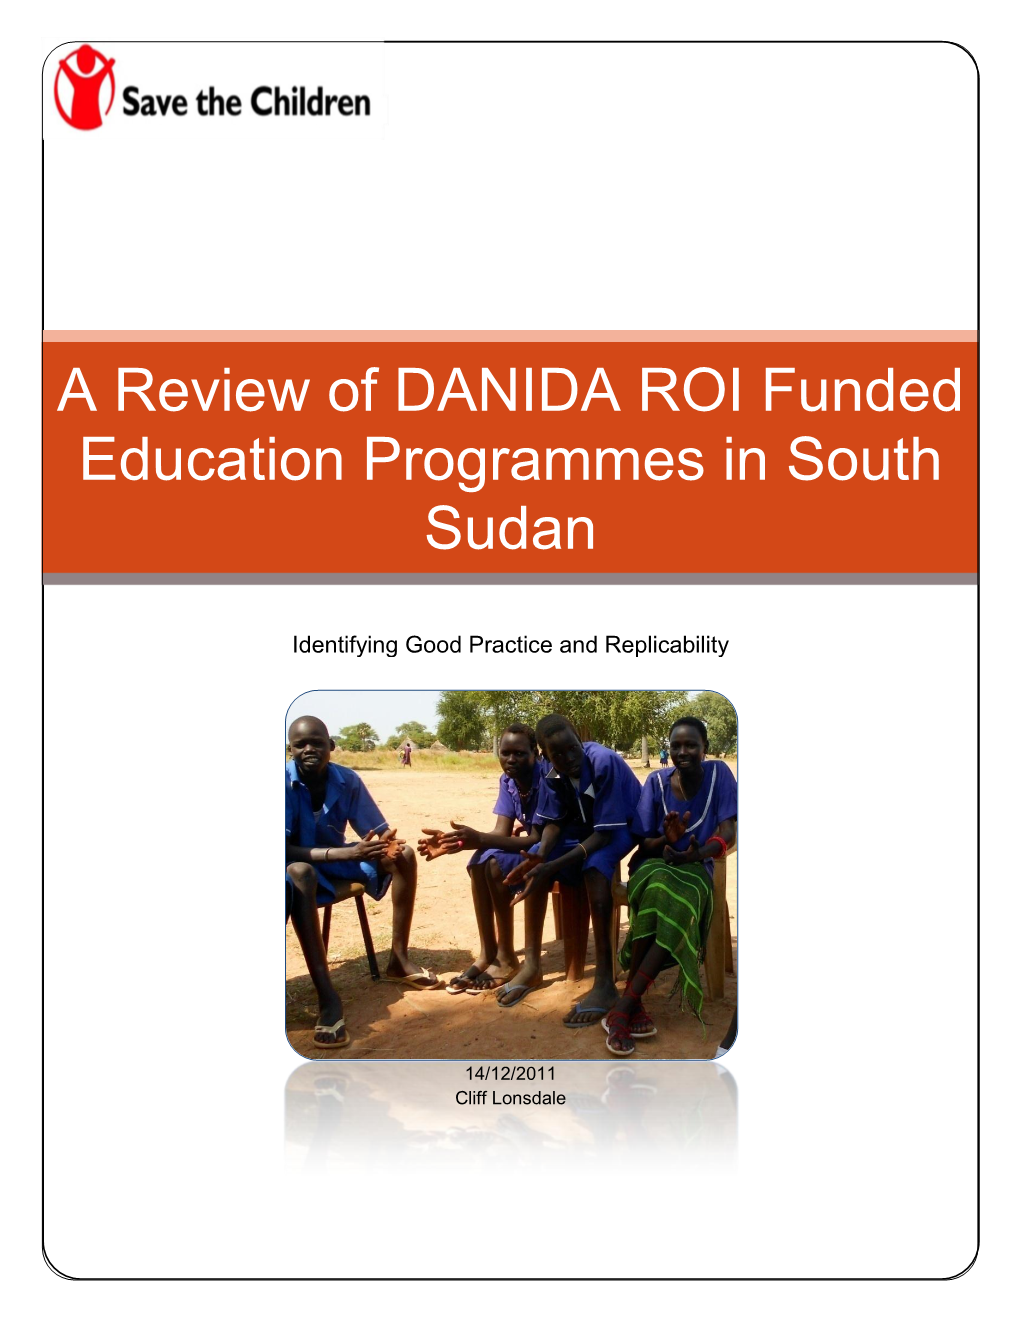 A Review of DANIDA Funded Education Programmes in South Sudan in South Programmes Education Funded Ofdanida Review A